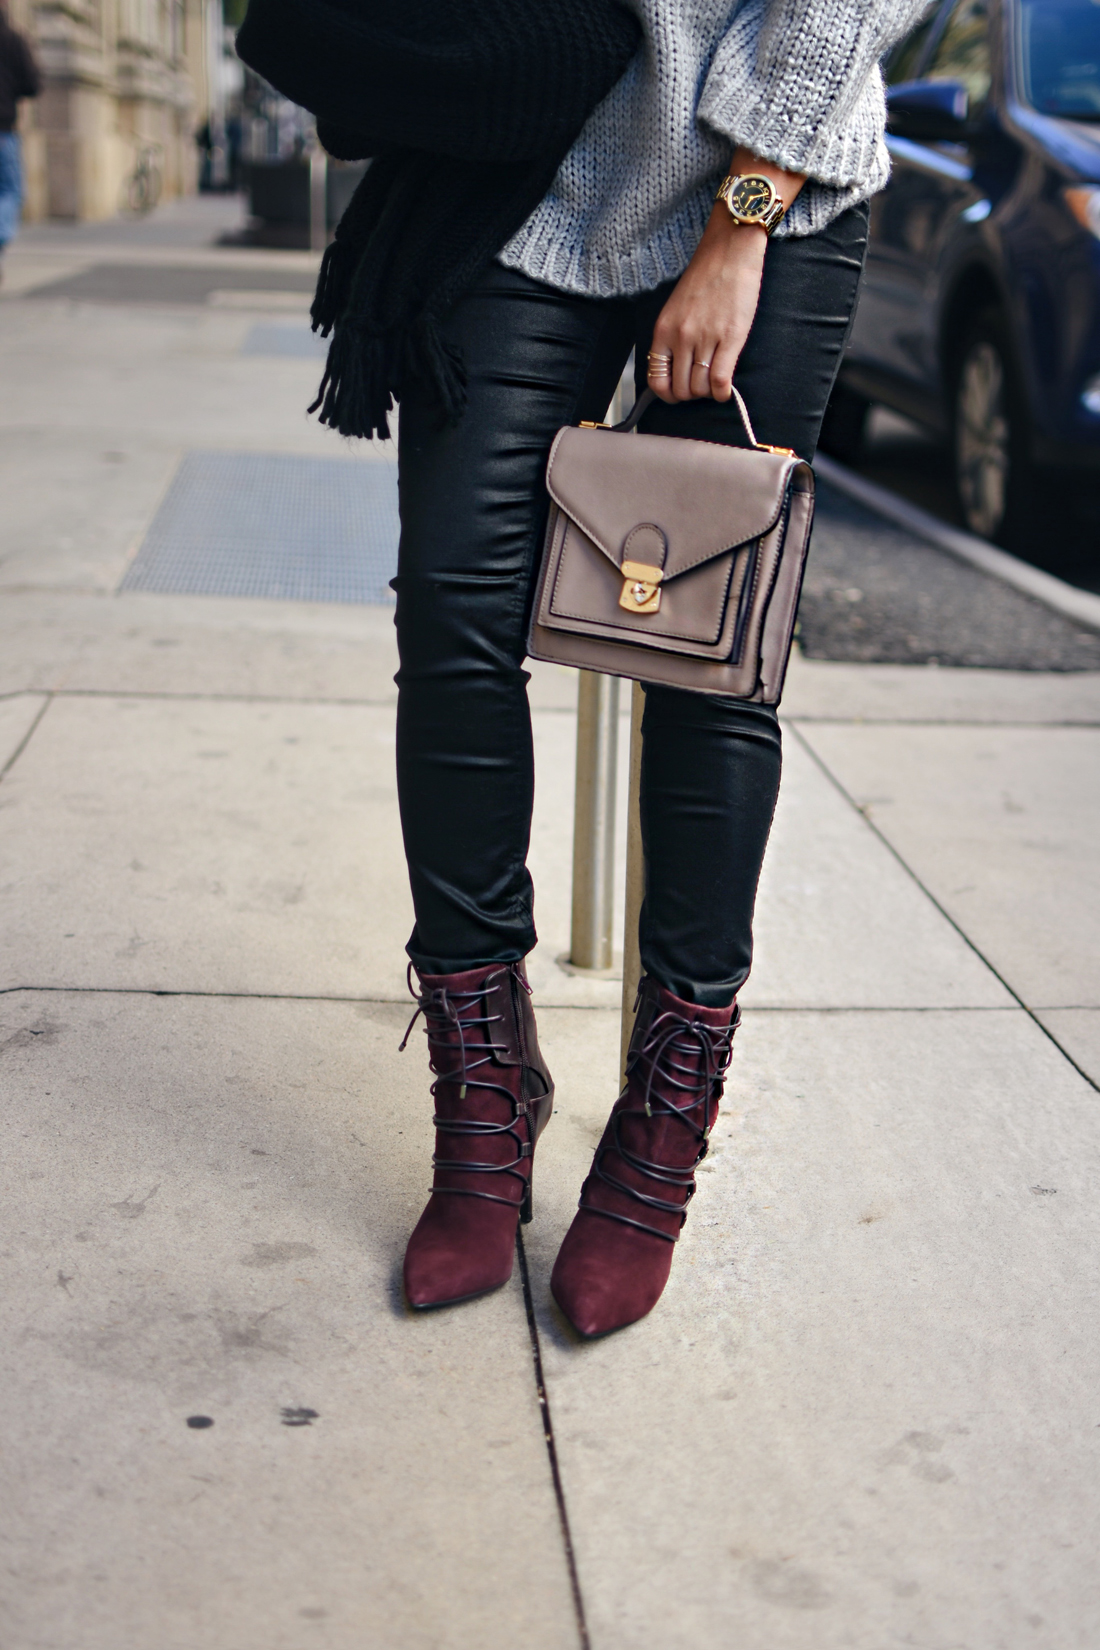 Carolina Hellal of Chic Talk wearing a Chicwish grey knit sweater, Rayban aviator sunglasses, Madewell coated skinny jeans and Nine West burgundy booties